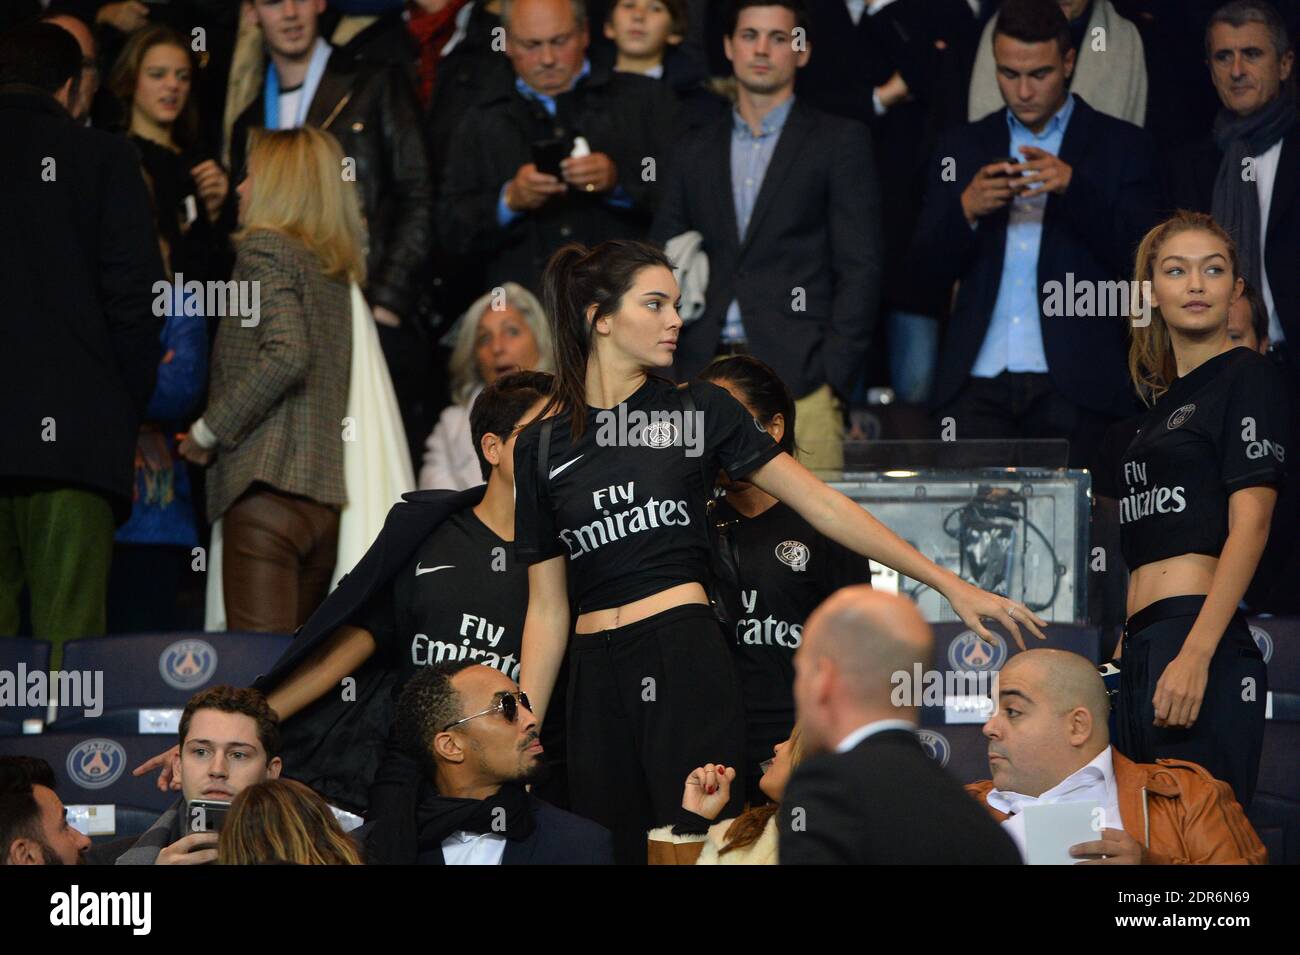 Kendall Jenner and Gigi Hadid watch from the stands French Ligue 1 match Paris  Saint-Germain FC (PSG) v Olympique de Marseille at Parc des Princes stadium  in Paris, France, on October 4,